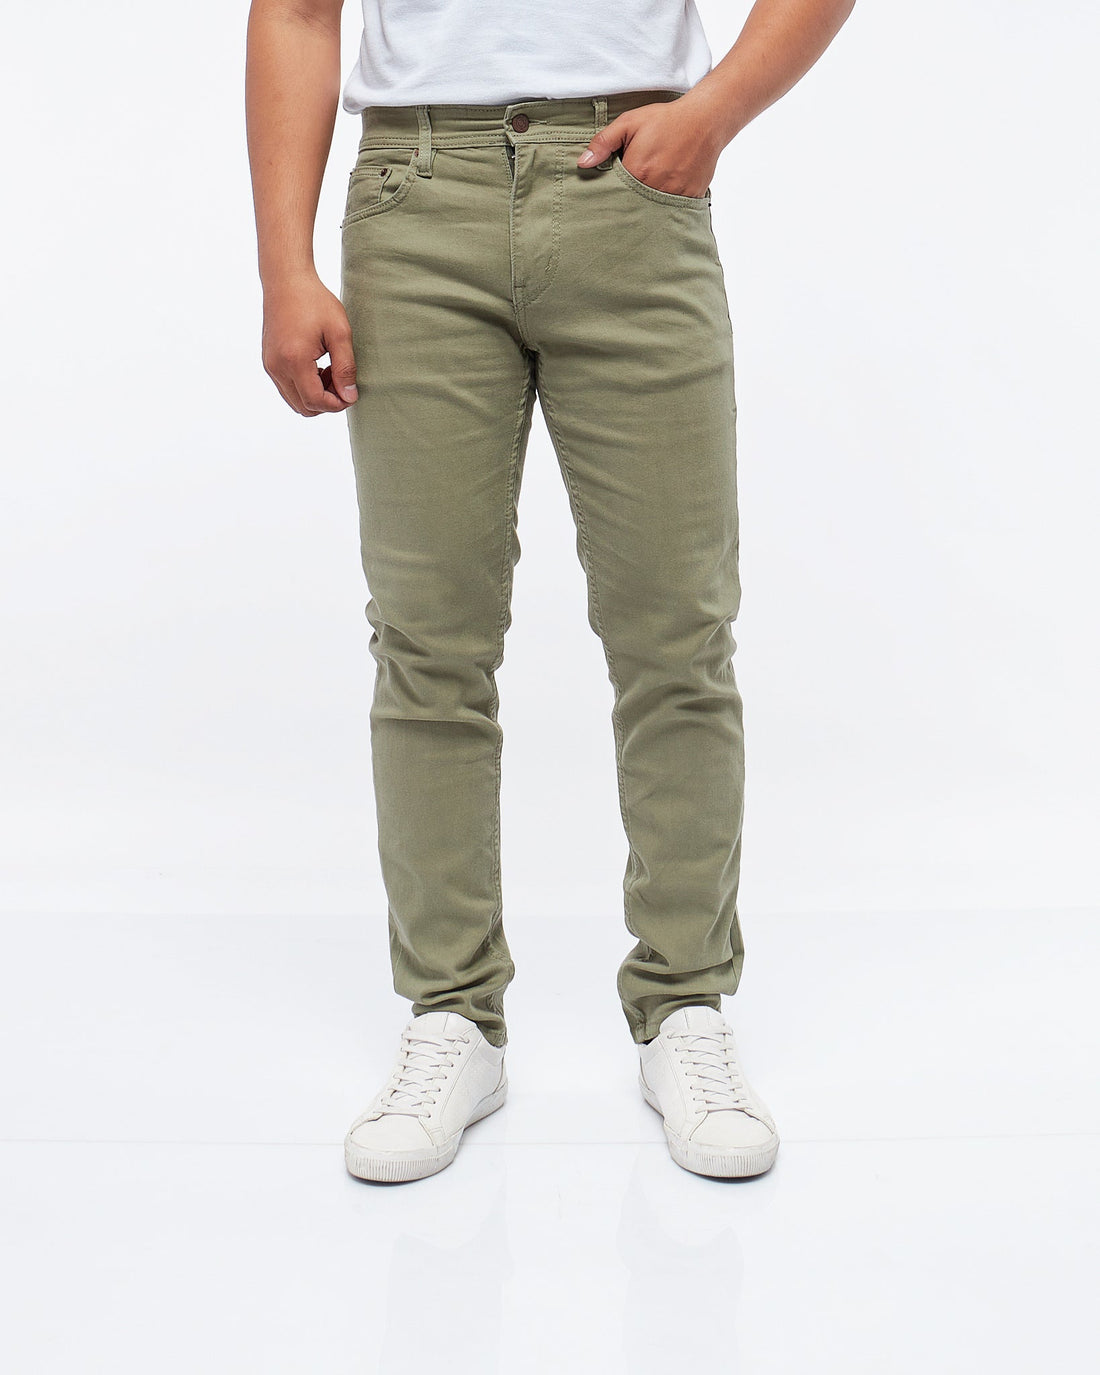 MOI OUTFIT-Soft Stretchy Men Slim Fit Jeans 23.90